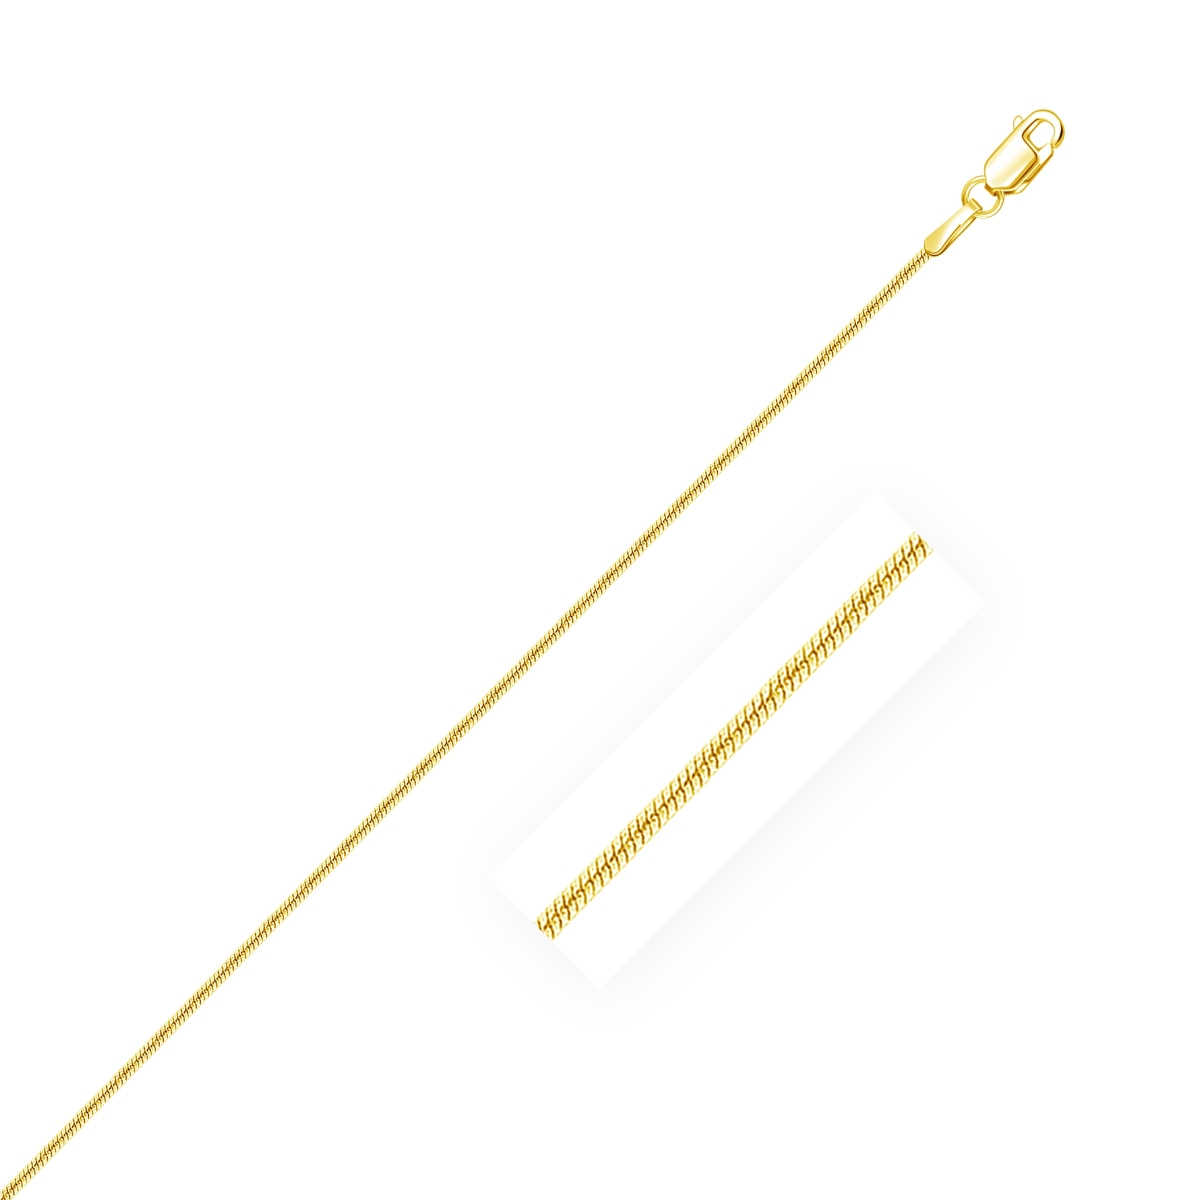 D140052-20 14k Yellow Gold Round Snake Chain, 0.9 Mm - Size 20 In.